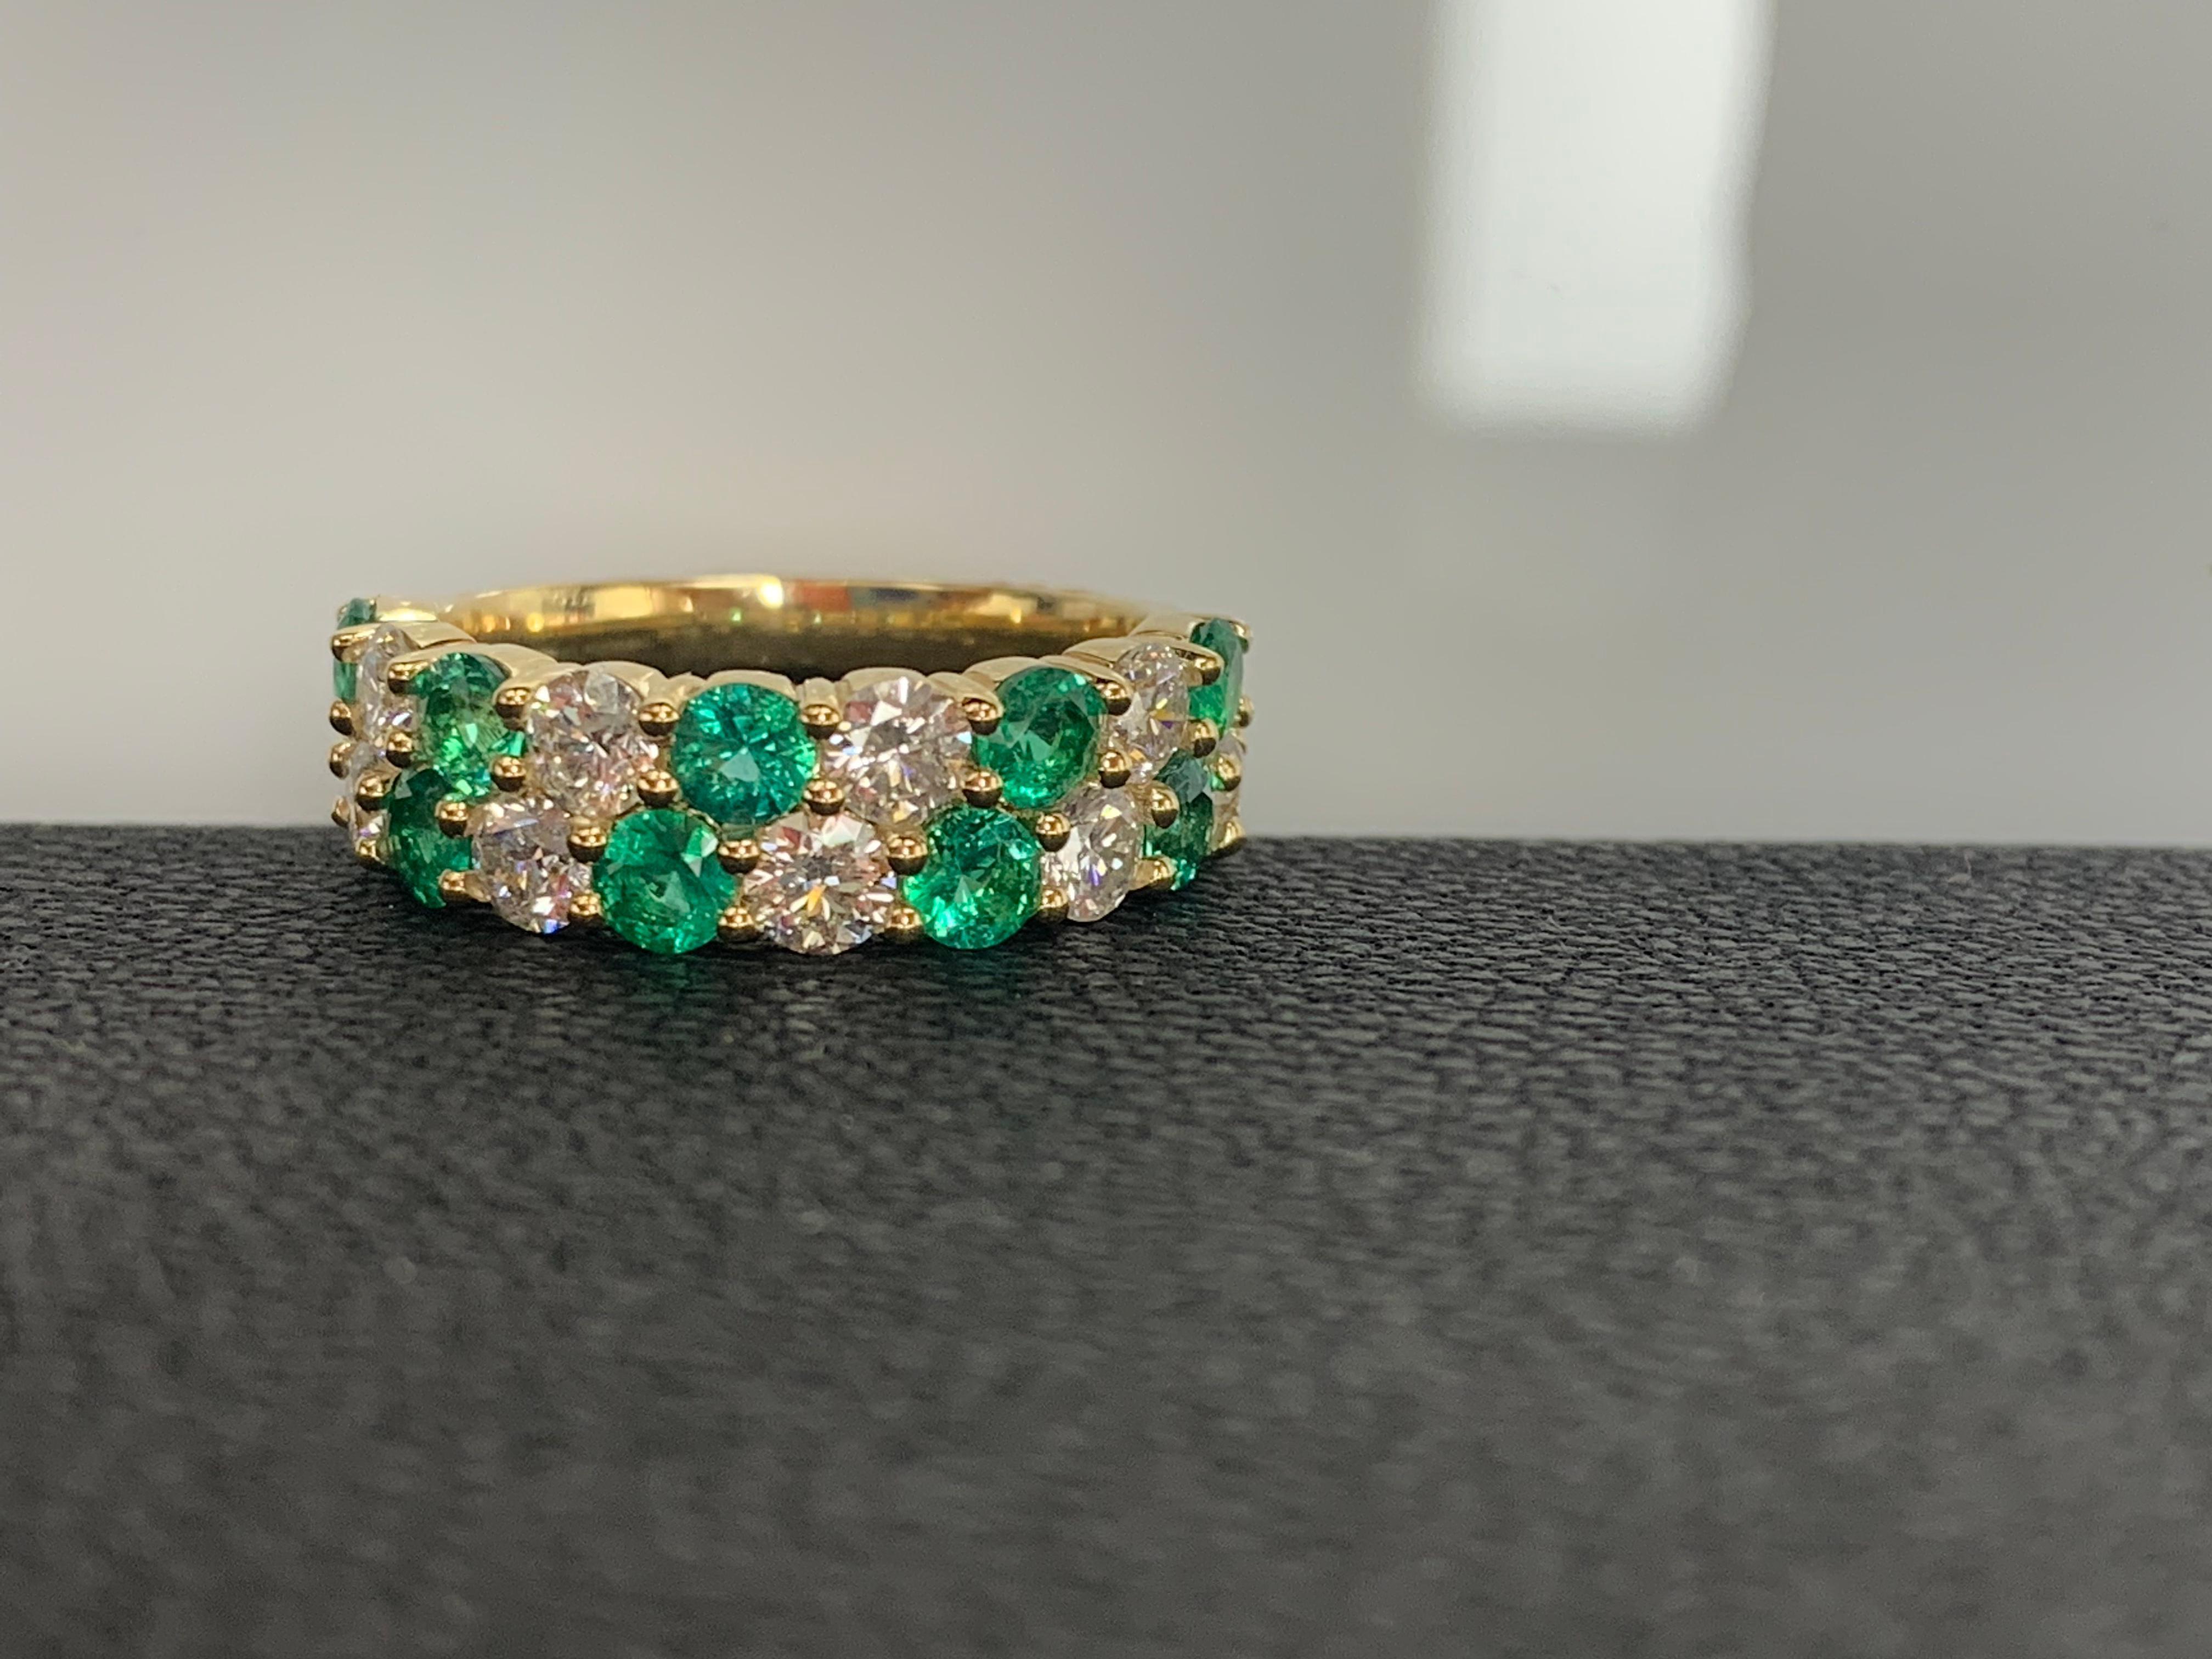 A unique and fashionable ZicZac ring showcasing two rows of round-shape 10 emerald and 9 diamonds, set in a band design. Emerald weighs 1.08 carats and Diamonds weigh 1.52 carats total. A brilliant and masterfully-made piece.

Style available in